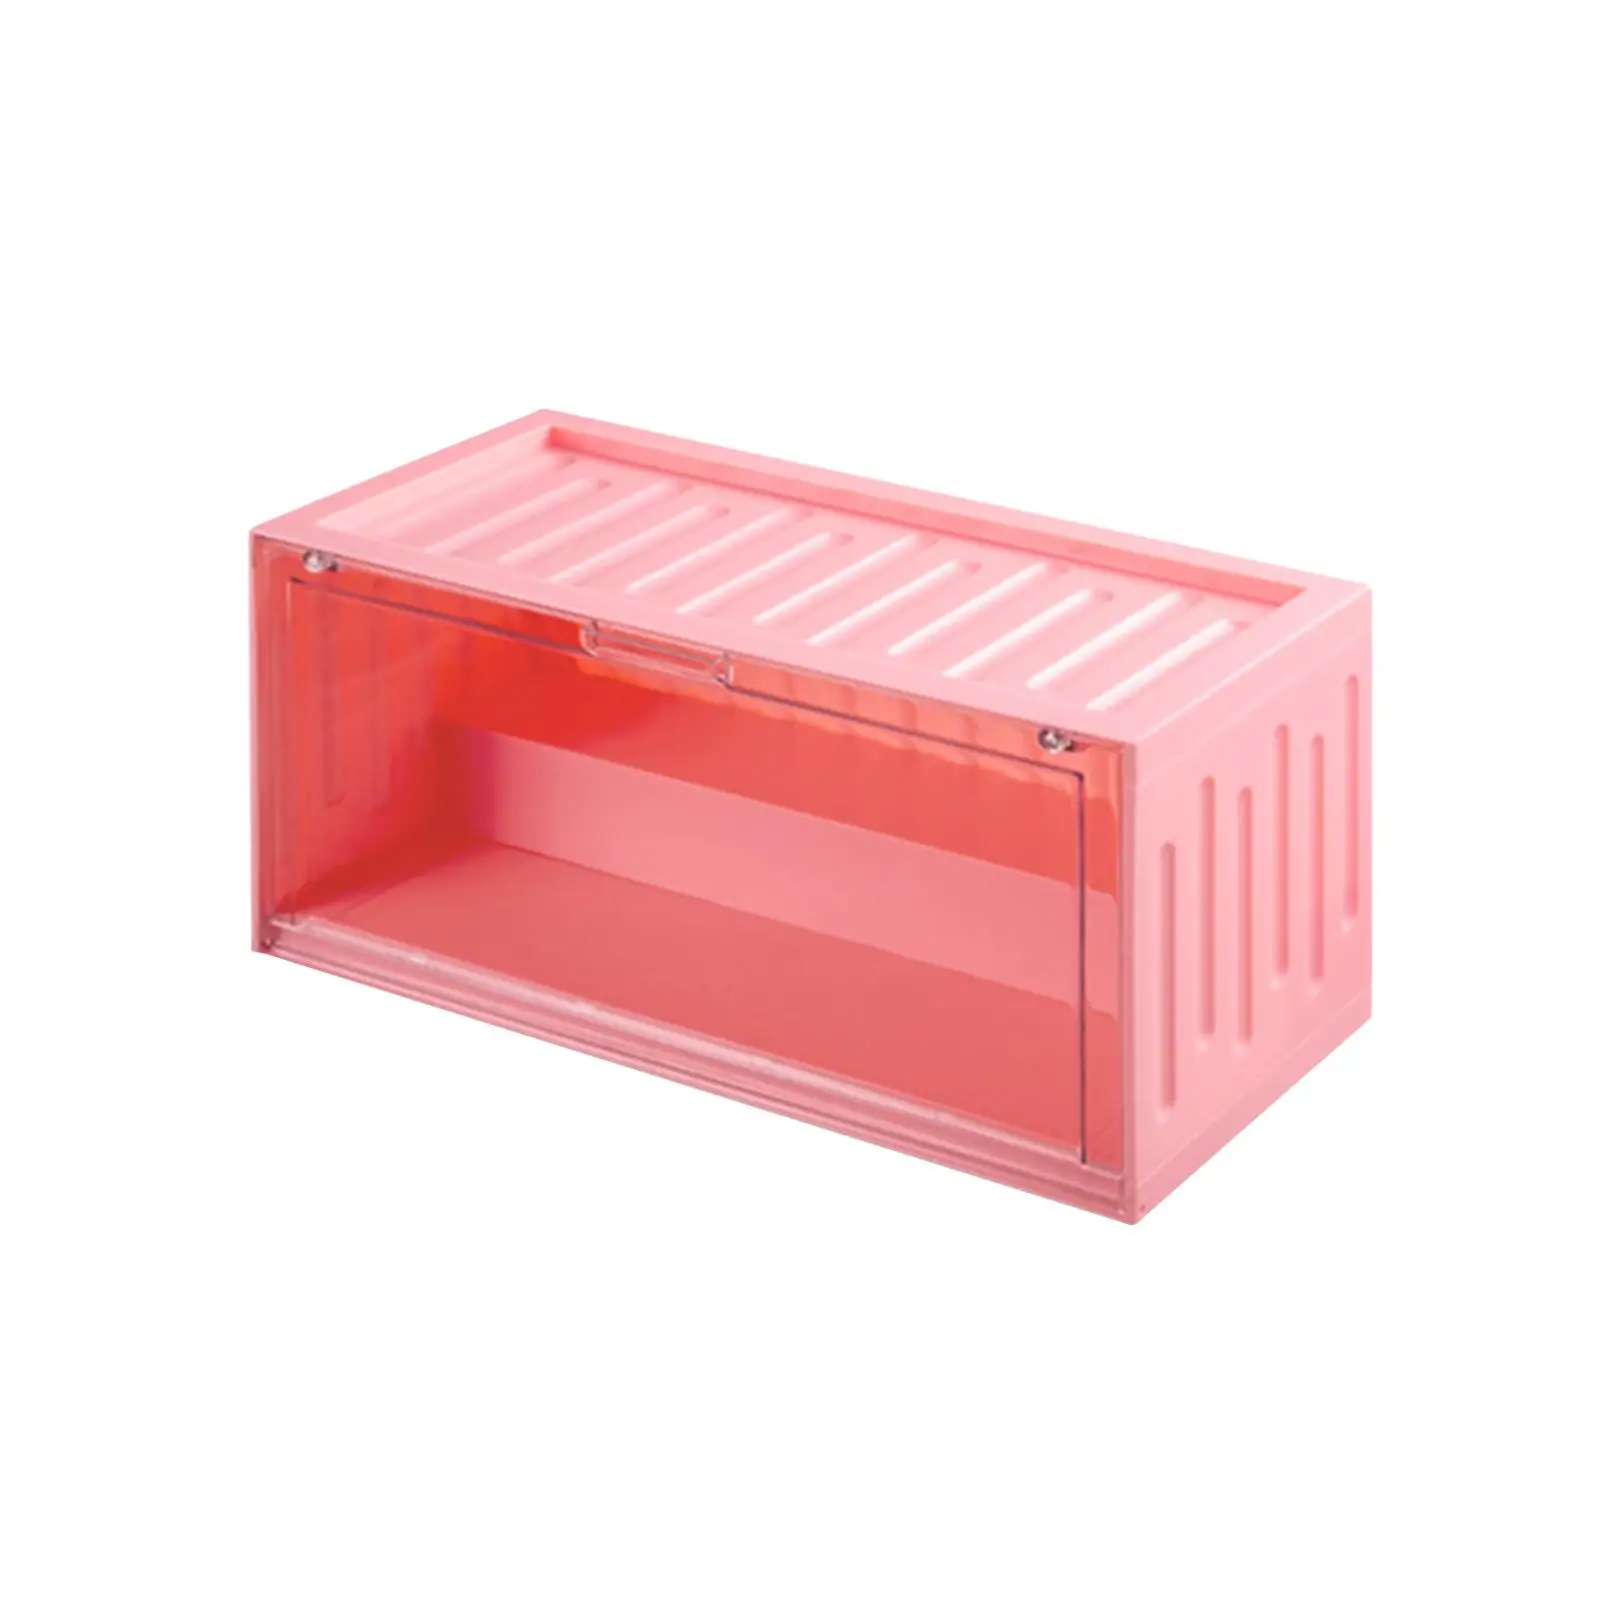 Figurines Collection Display Case Dustproof Showcase Container for Models